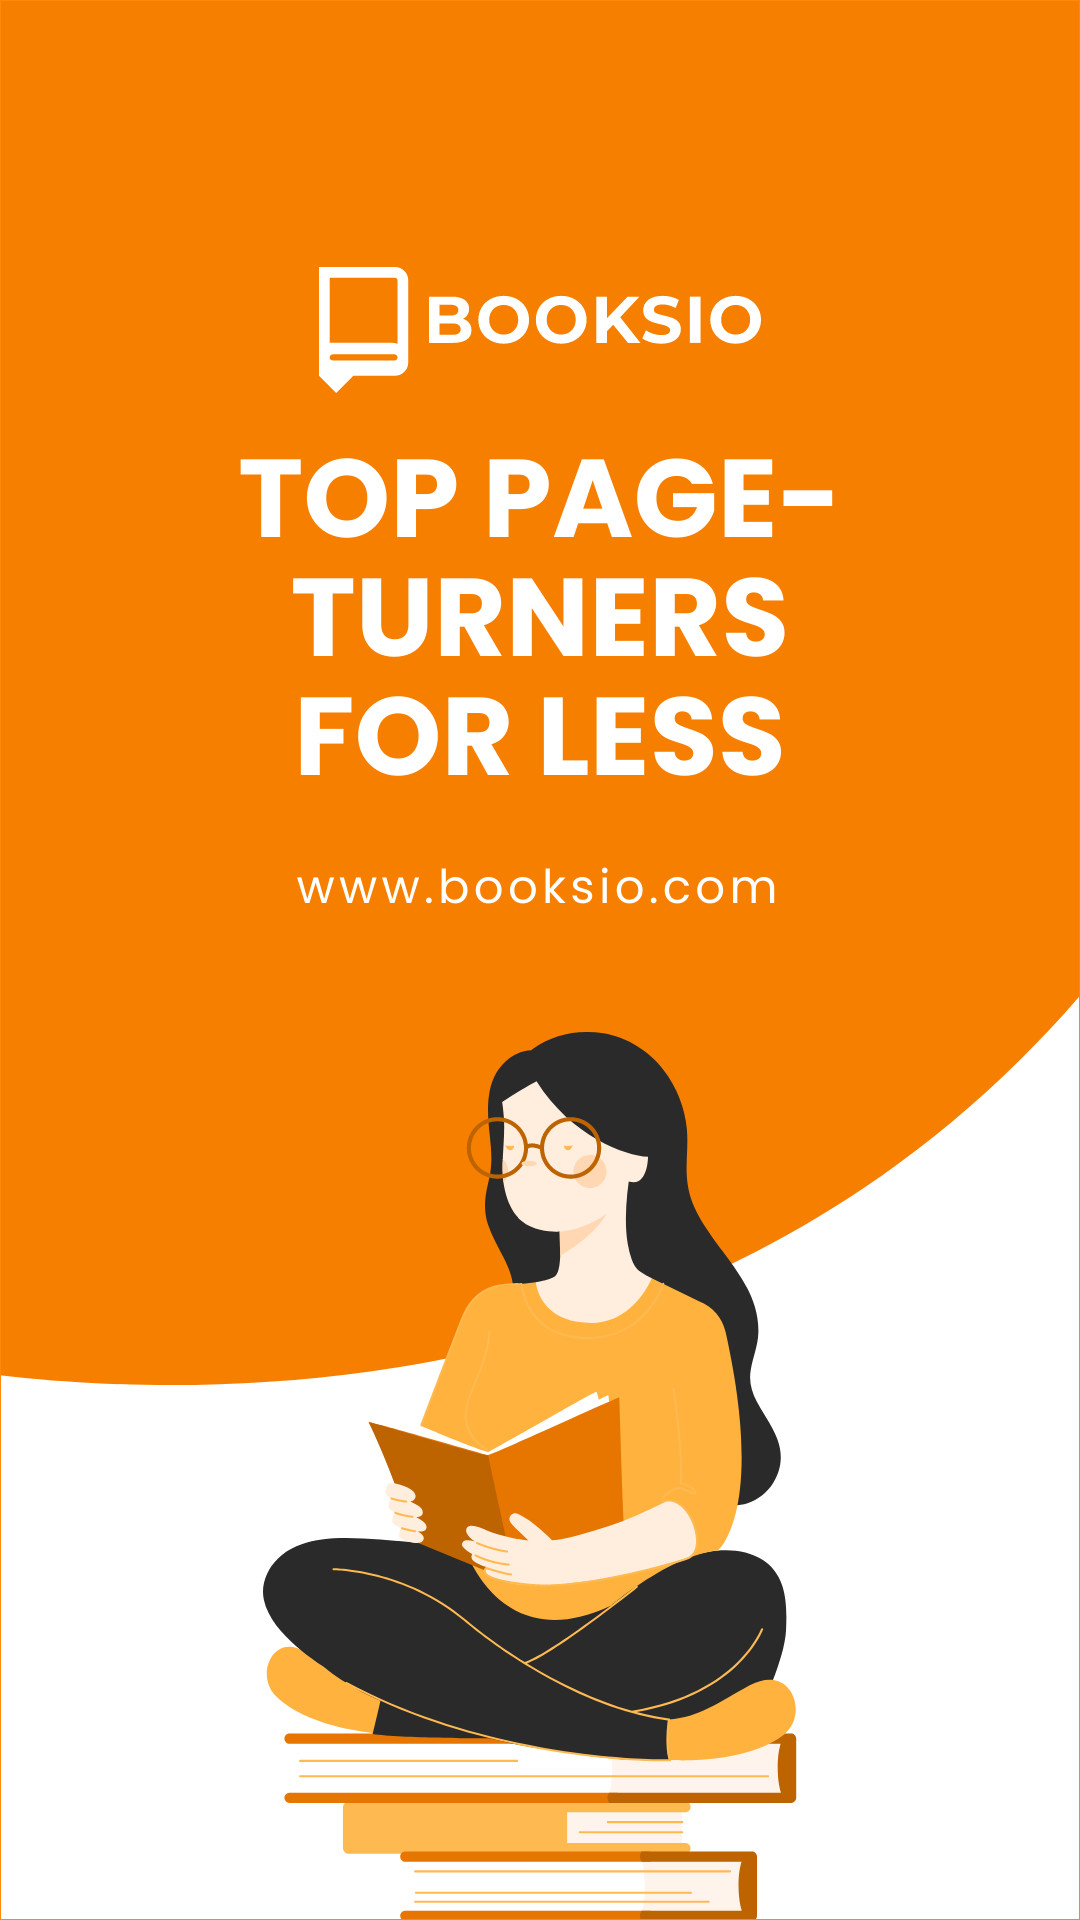 Top Page-turners for Less Books